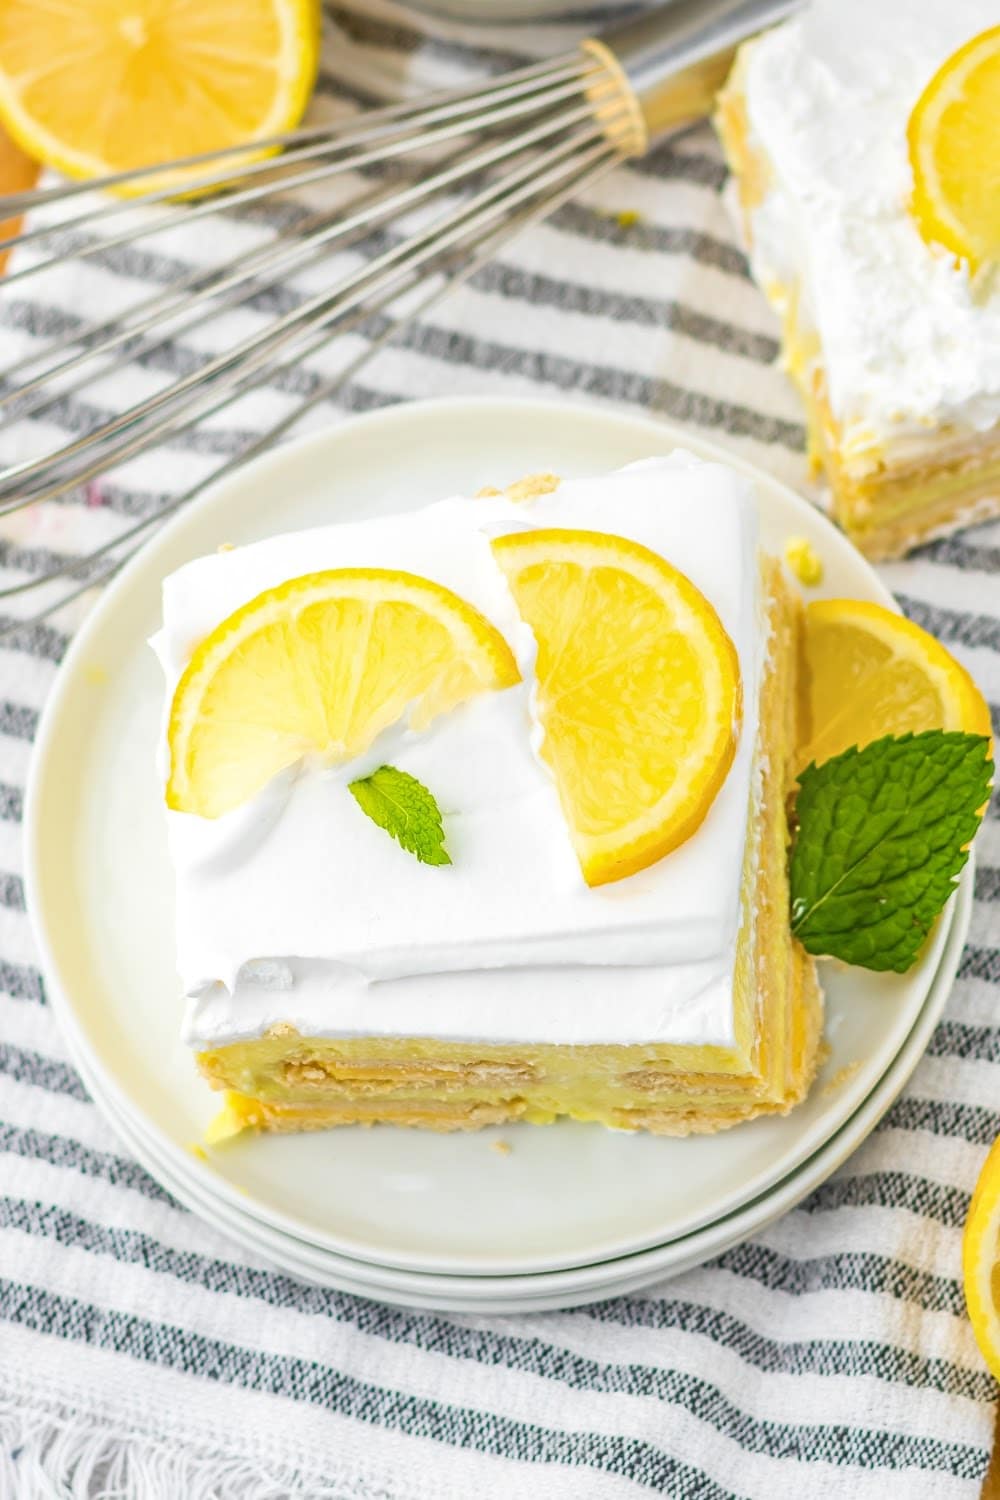 A slice of icebox cake topped with lemon slices and mint on a white plate.